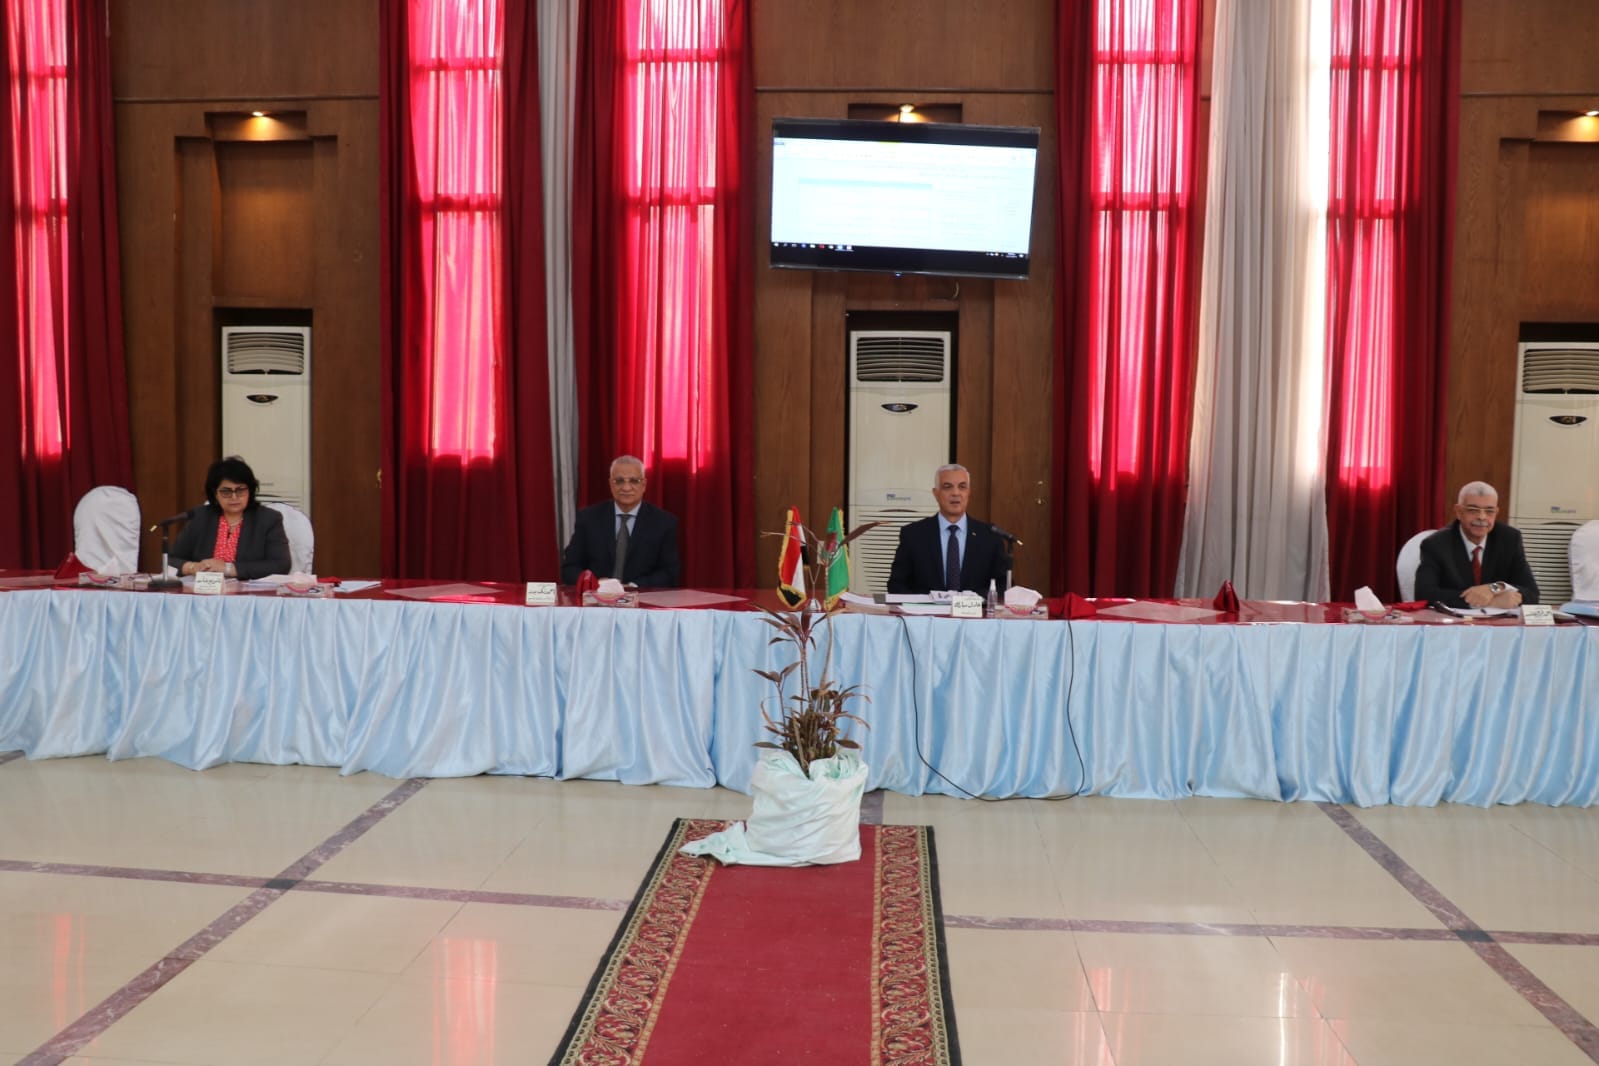 Mubarak chaired the University Council for the month of April 2022